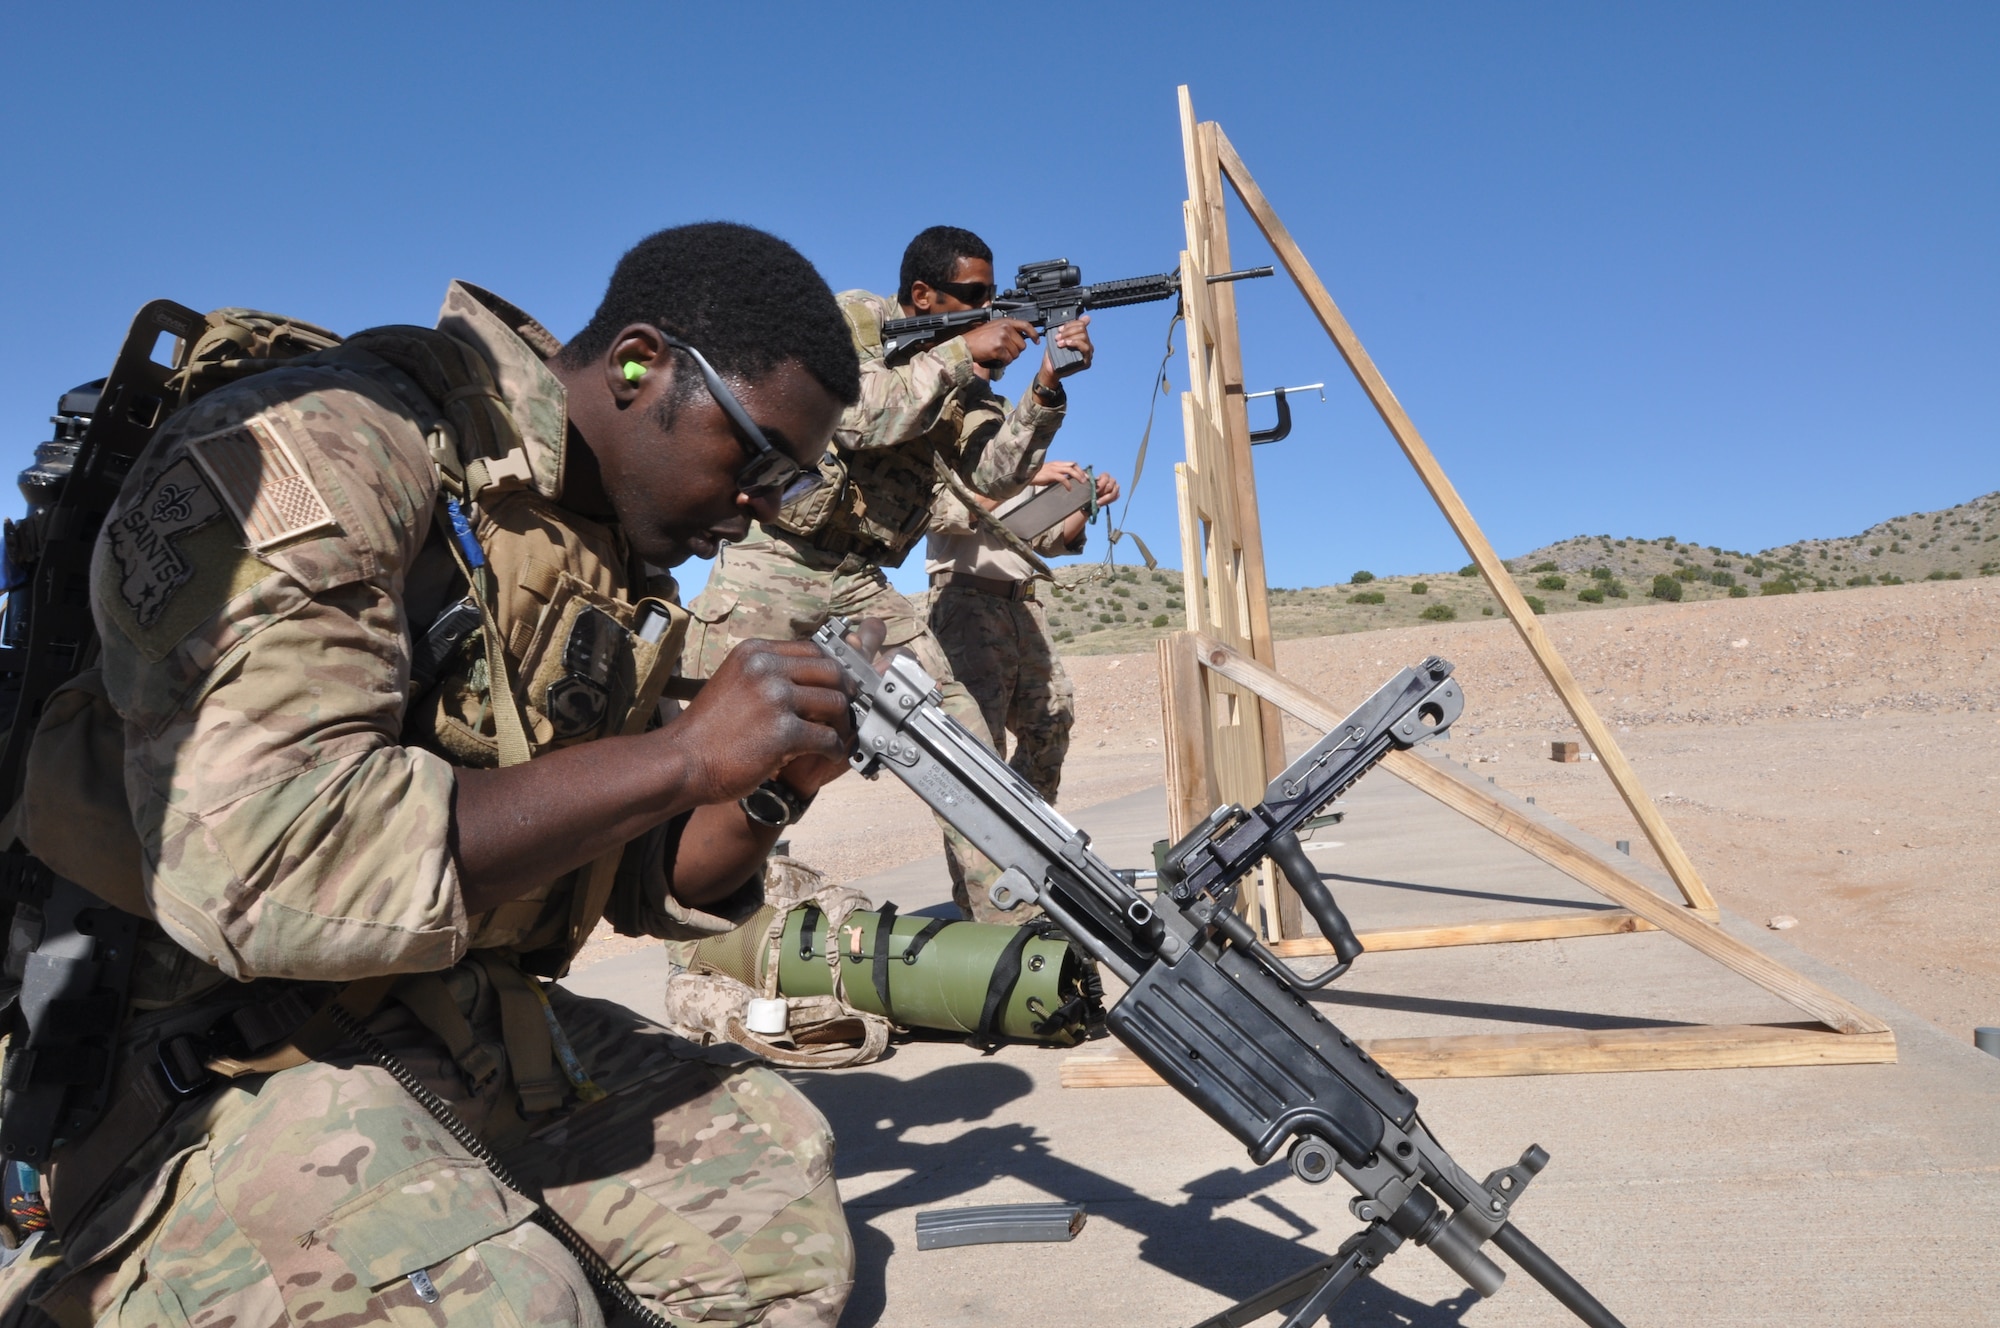 A pararescuman shoots his rifle downrange while his teammates assembles another rifle as part of a stress-shooting and patient-care exercise during the 2014 Guardian Angel Rodeo, Kirtland Air Force Base, New Mexico, September 25, 2014. The rodeo, or competition, was a week-long event that tested the PJs on land navigation skills, high-angel rope rescues, survival techniques, medical skills, weapons operations and overall physical endurance. (U.S. Air Force photo/ Tech. Sgt. Katie Spencer)